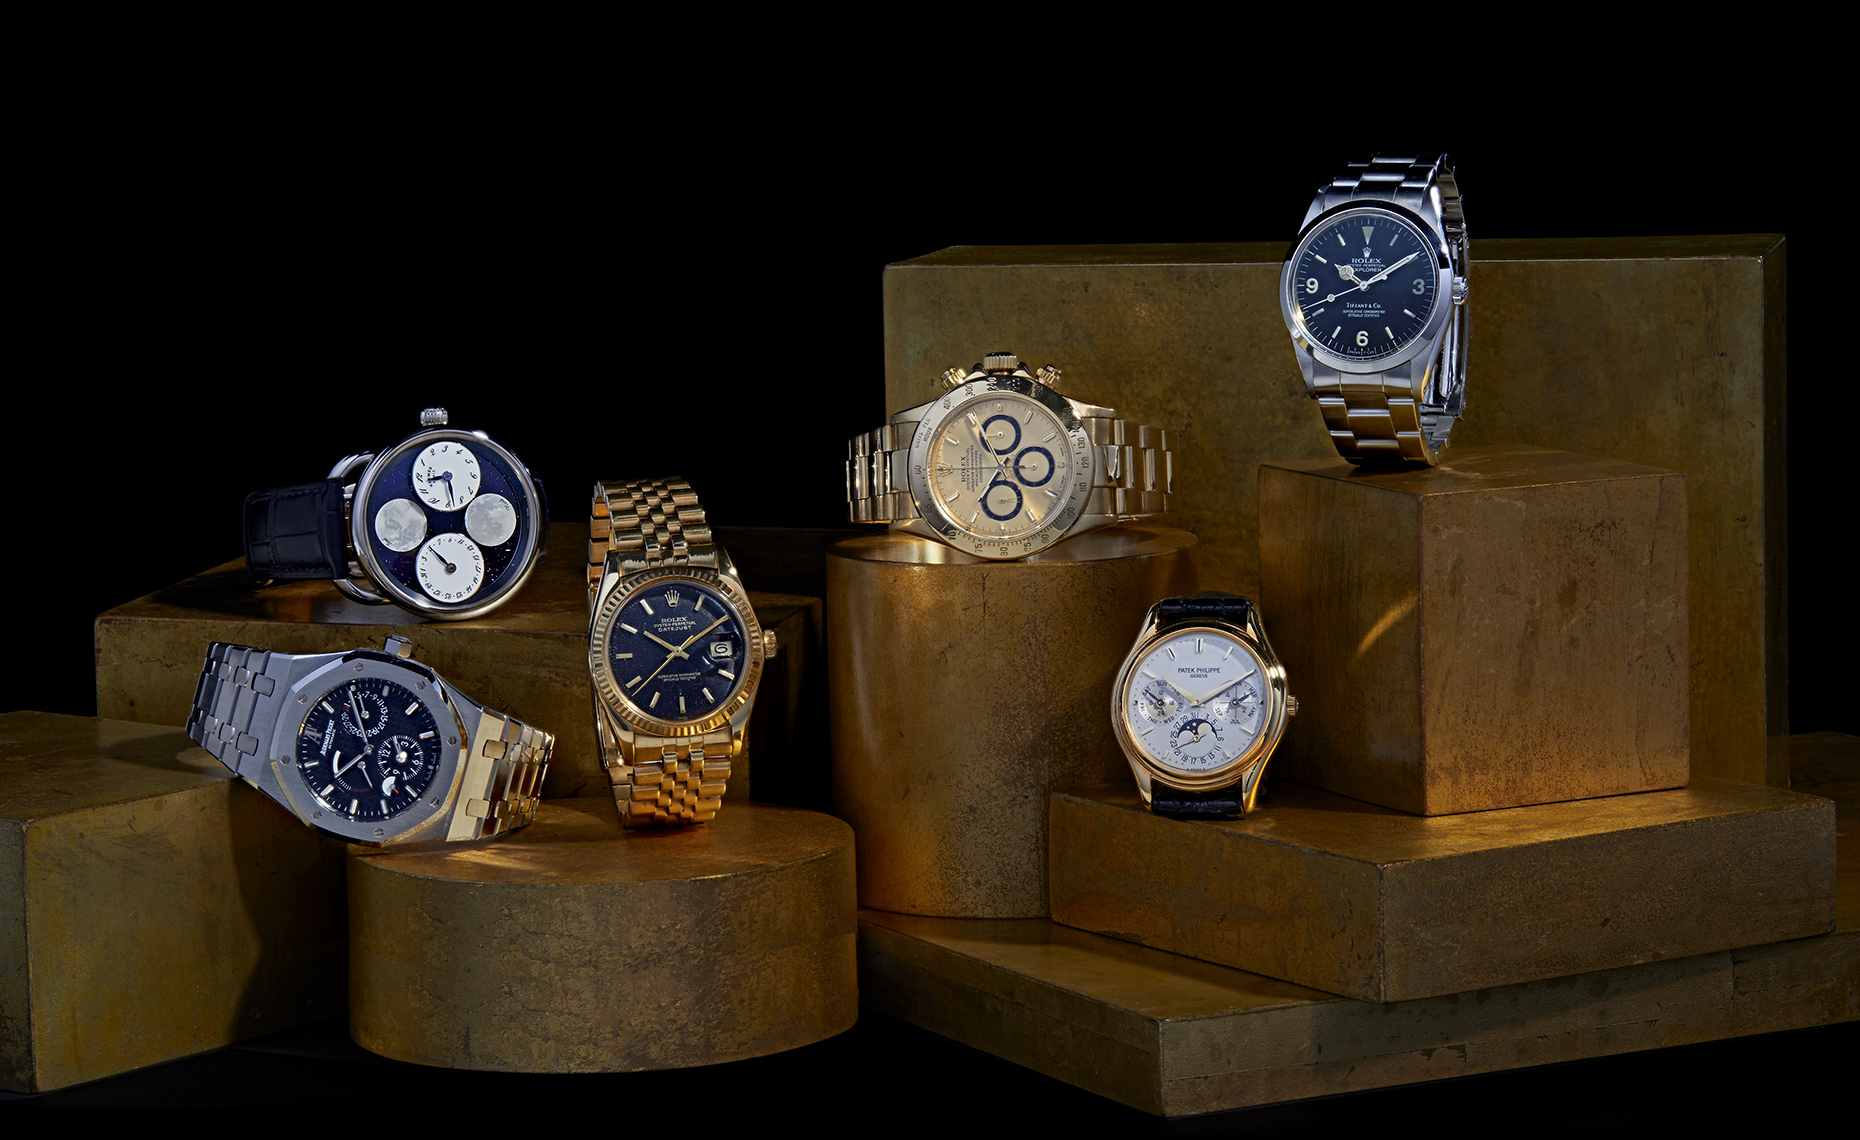 A collection of rare and coveted watched photographed by still life photographer David Lewis Taylor,